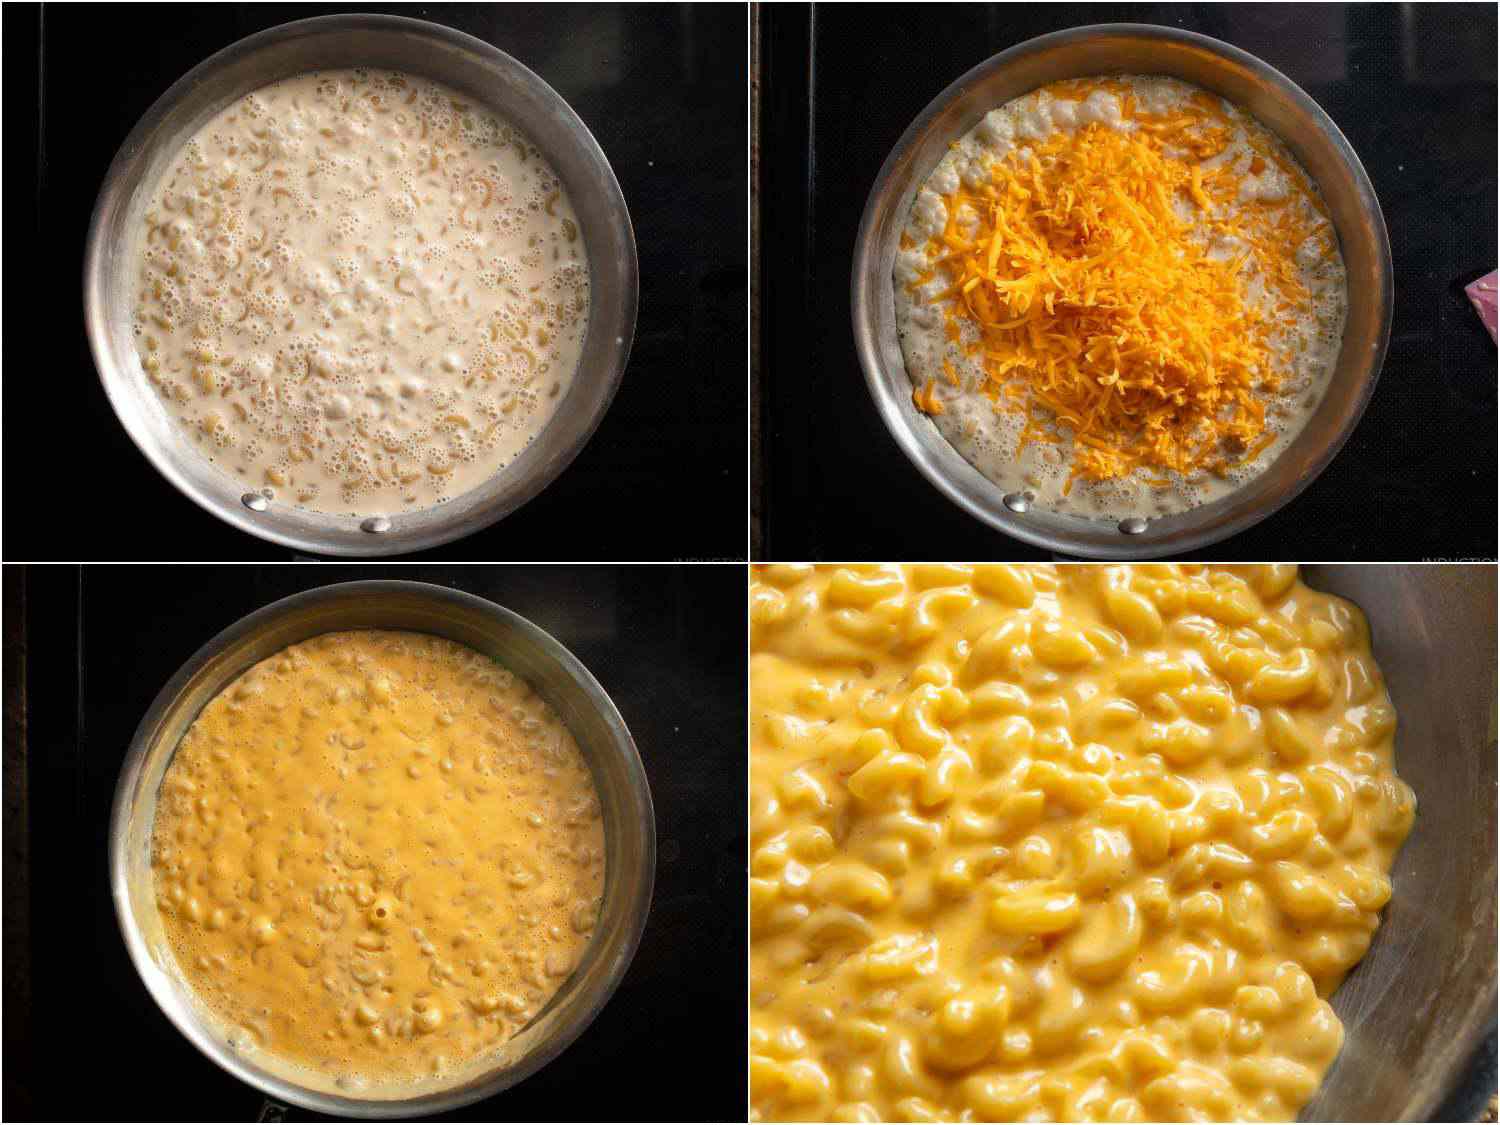 A collage showing the steps to making 3-ingredient mac and cheese. The evaporated milk is added to cooked pasta. The second photo shows shredded cheddar cheese added to the pasta and milk. The third photo shows the cheese is melted but not yet incorporated. The fourth photo shows the cheese sauce enveloping the noodles.